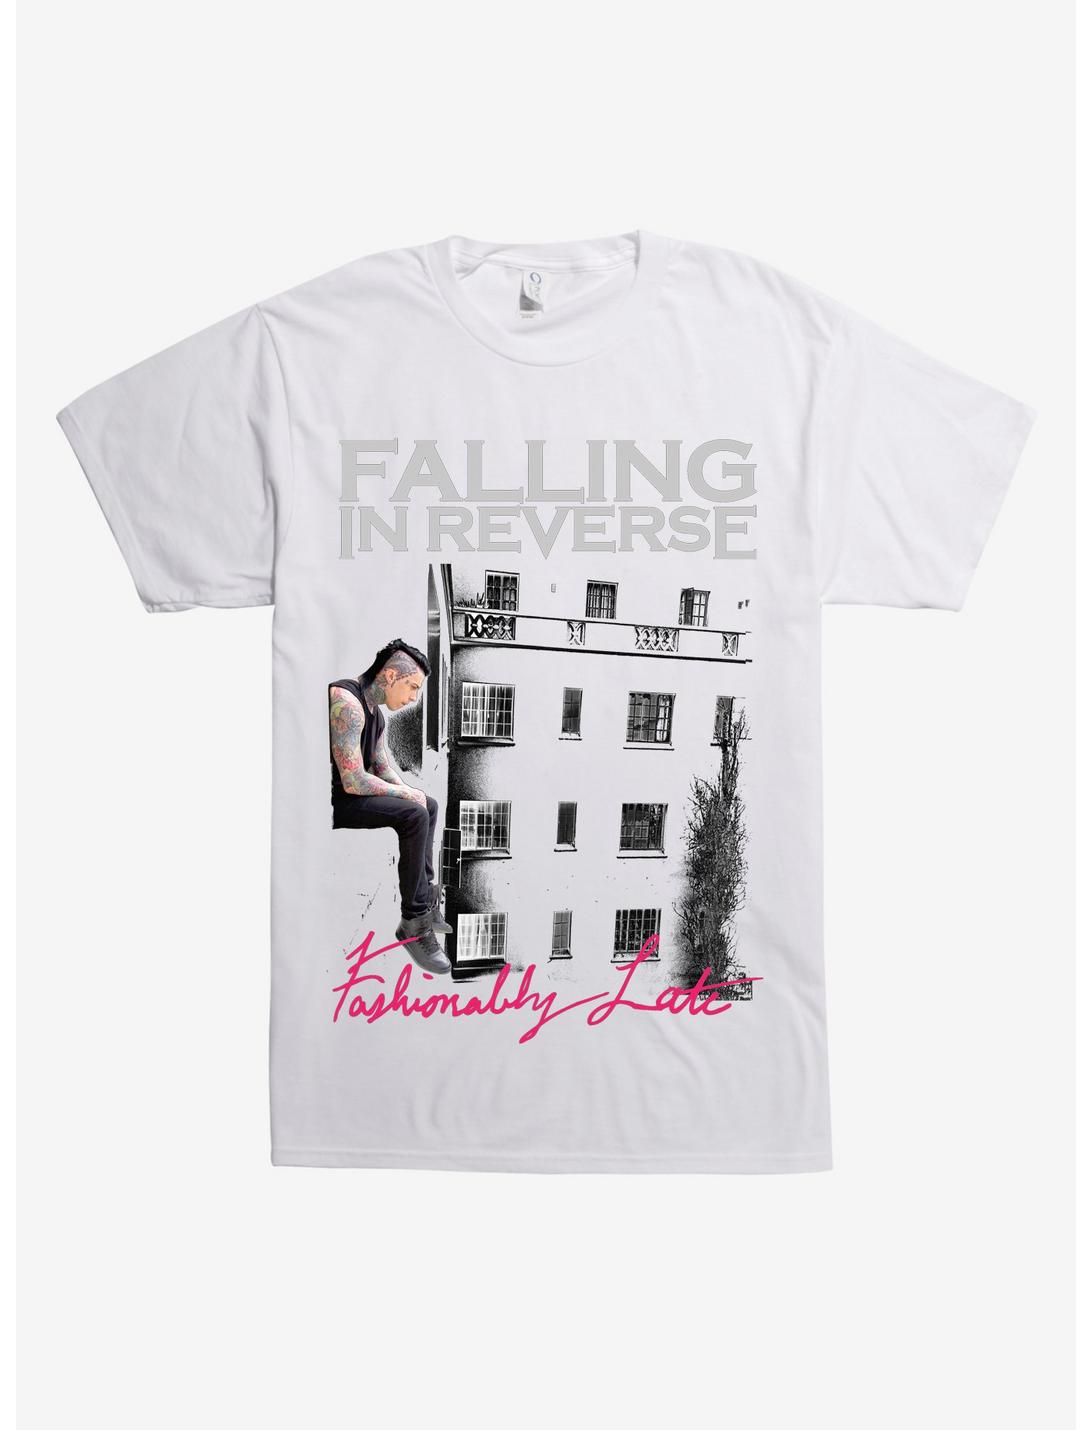 Falling in Reverse Late T-Shirt, WHITE, hi-res